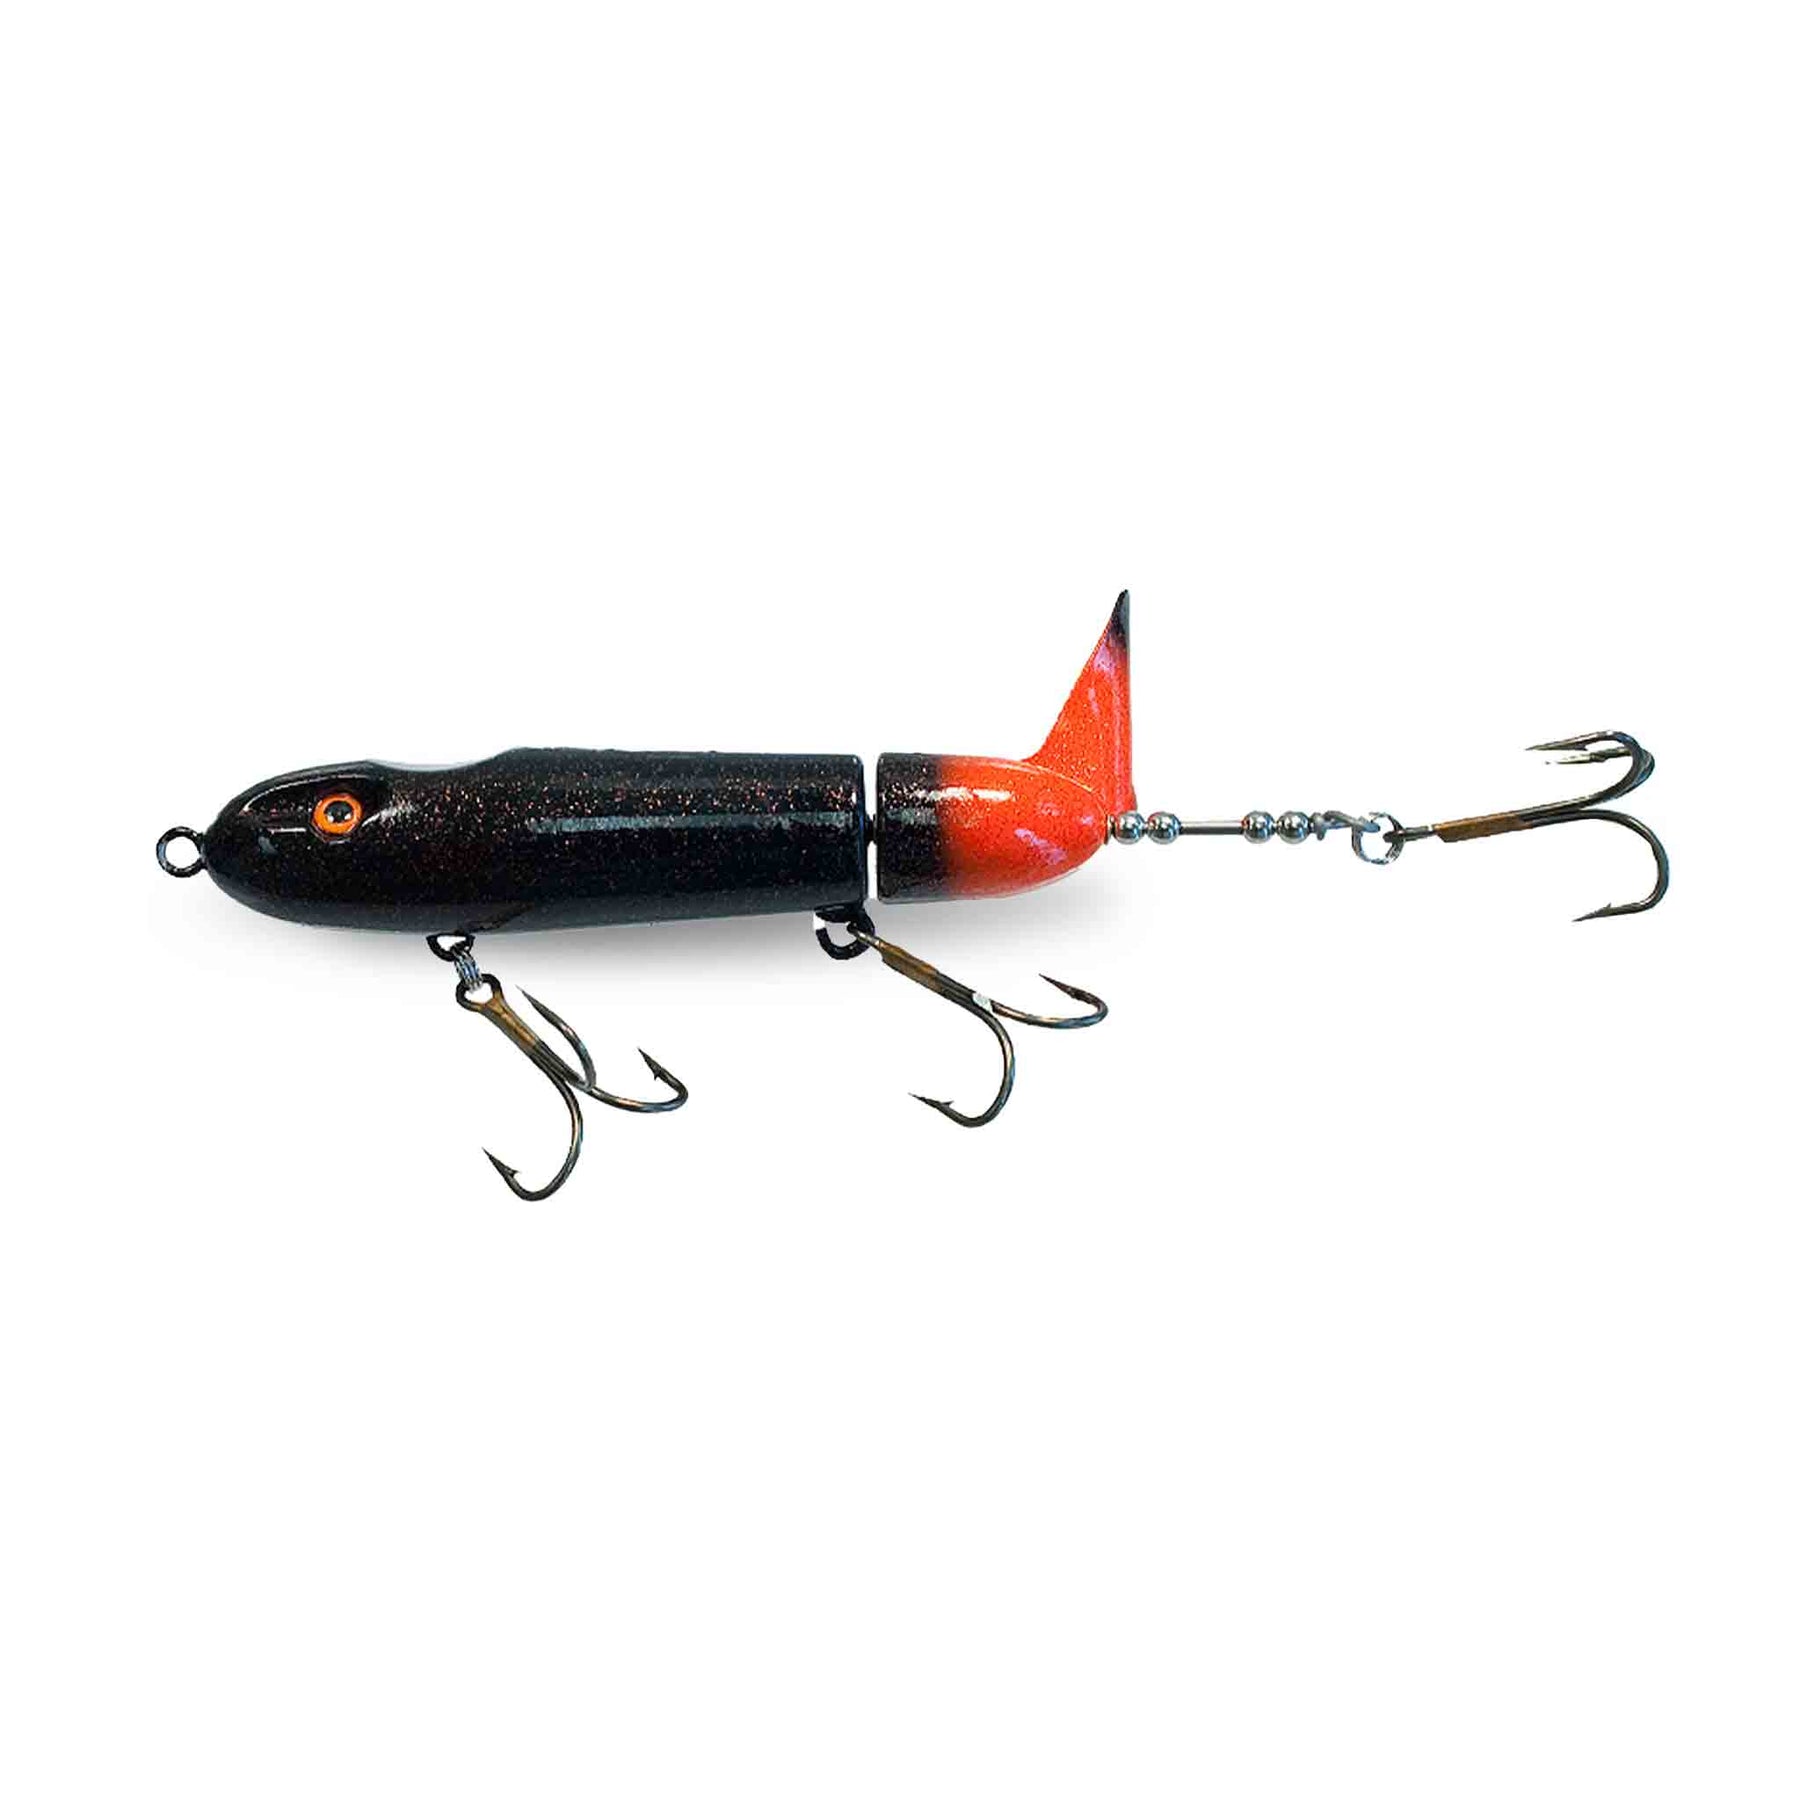 View of Topwater Sennett Tackle Company Pacemaker 7" Topwater Propbait Black w Orange Tail available at EZOKO Pike and Musky Shop